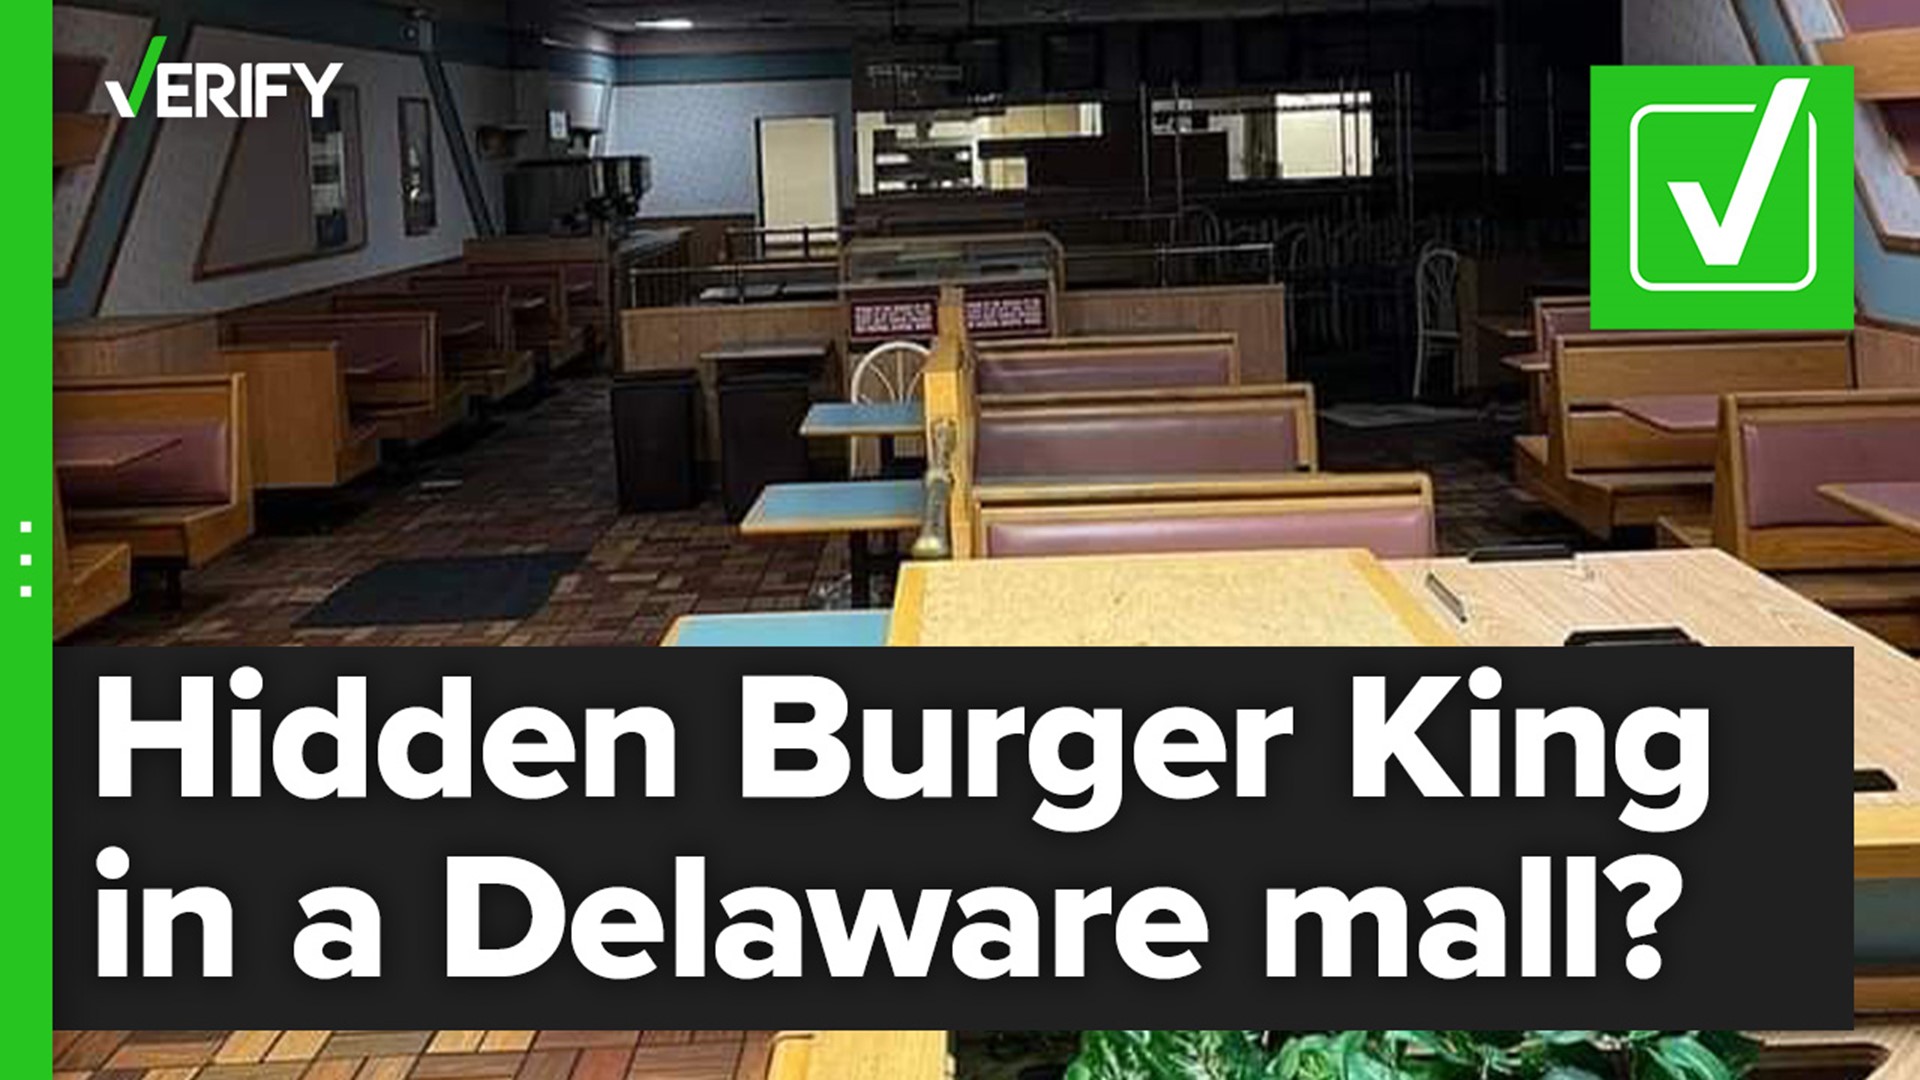 A photo of a retro Burger King, its decor still reminiscent of the 1980s, went viral. The restaurant has remained intact since it closed in 2009.